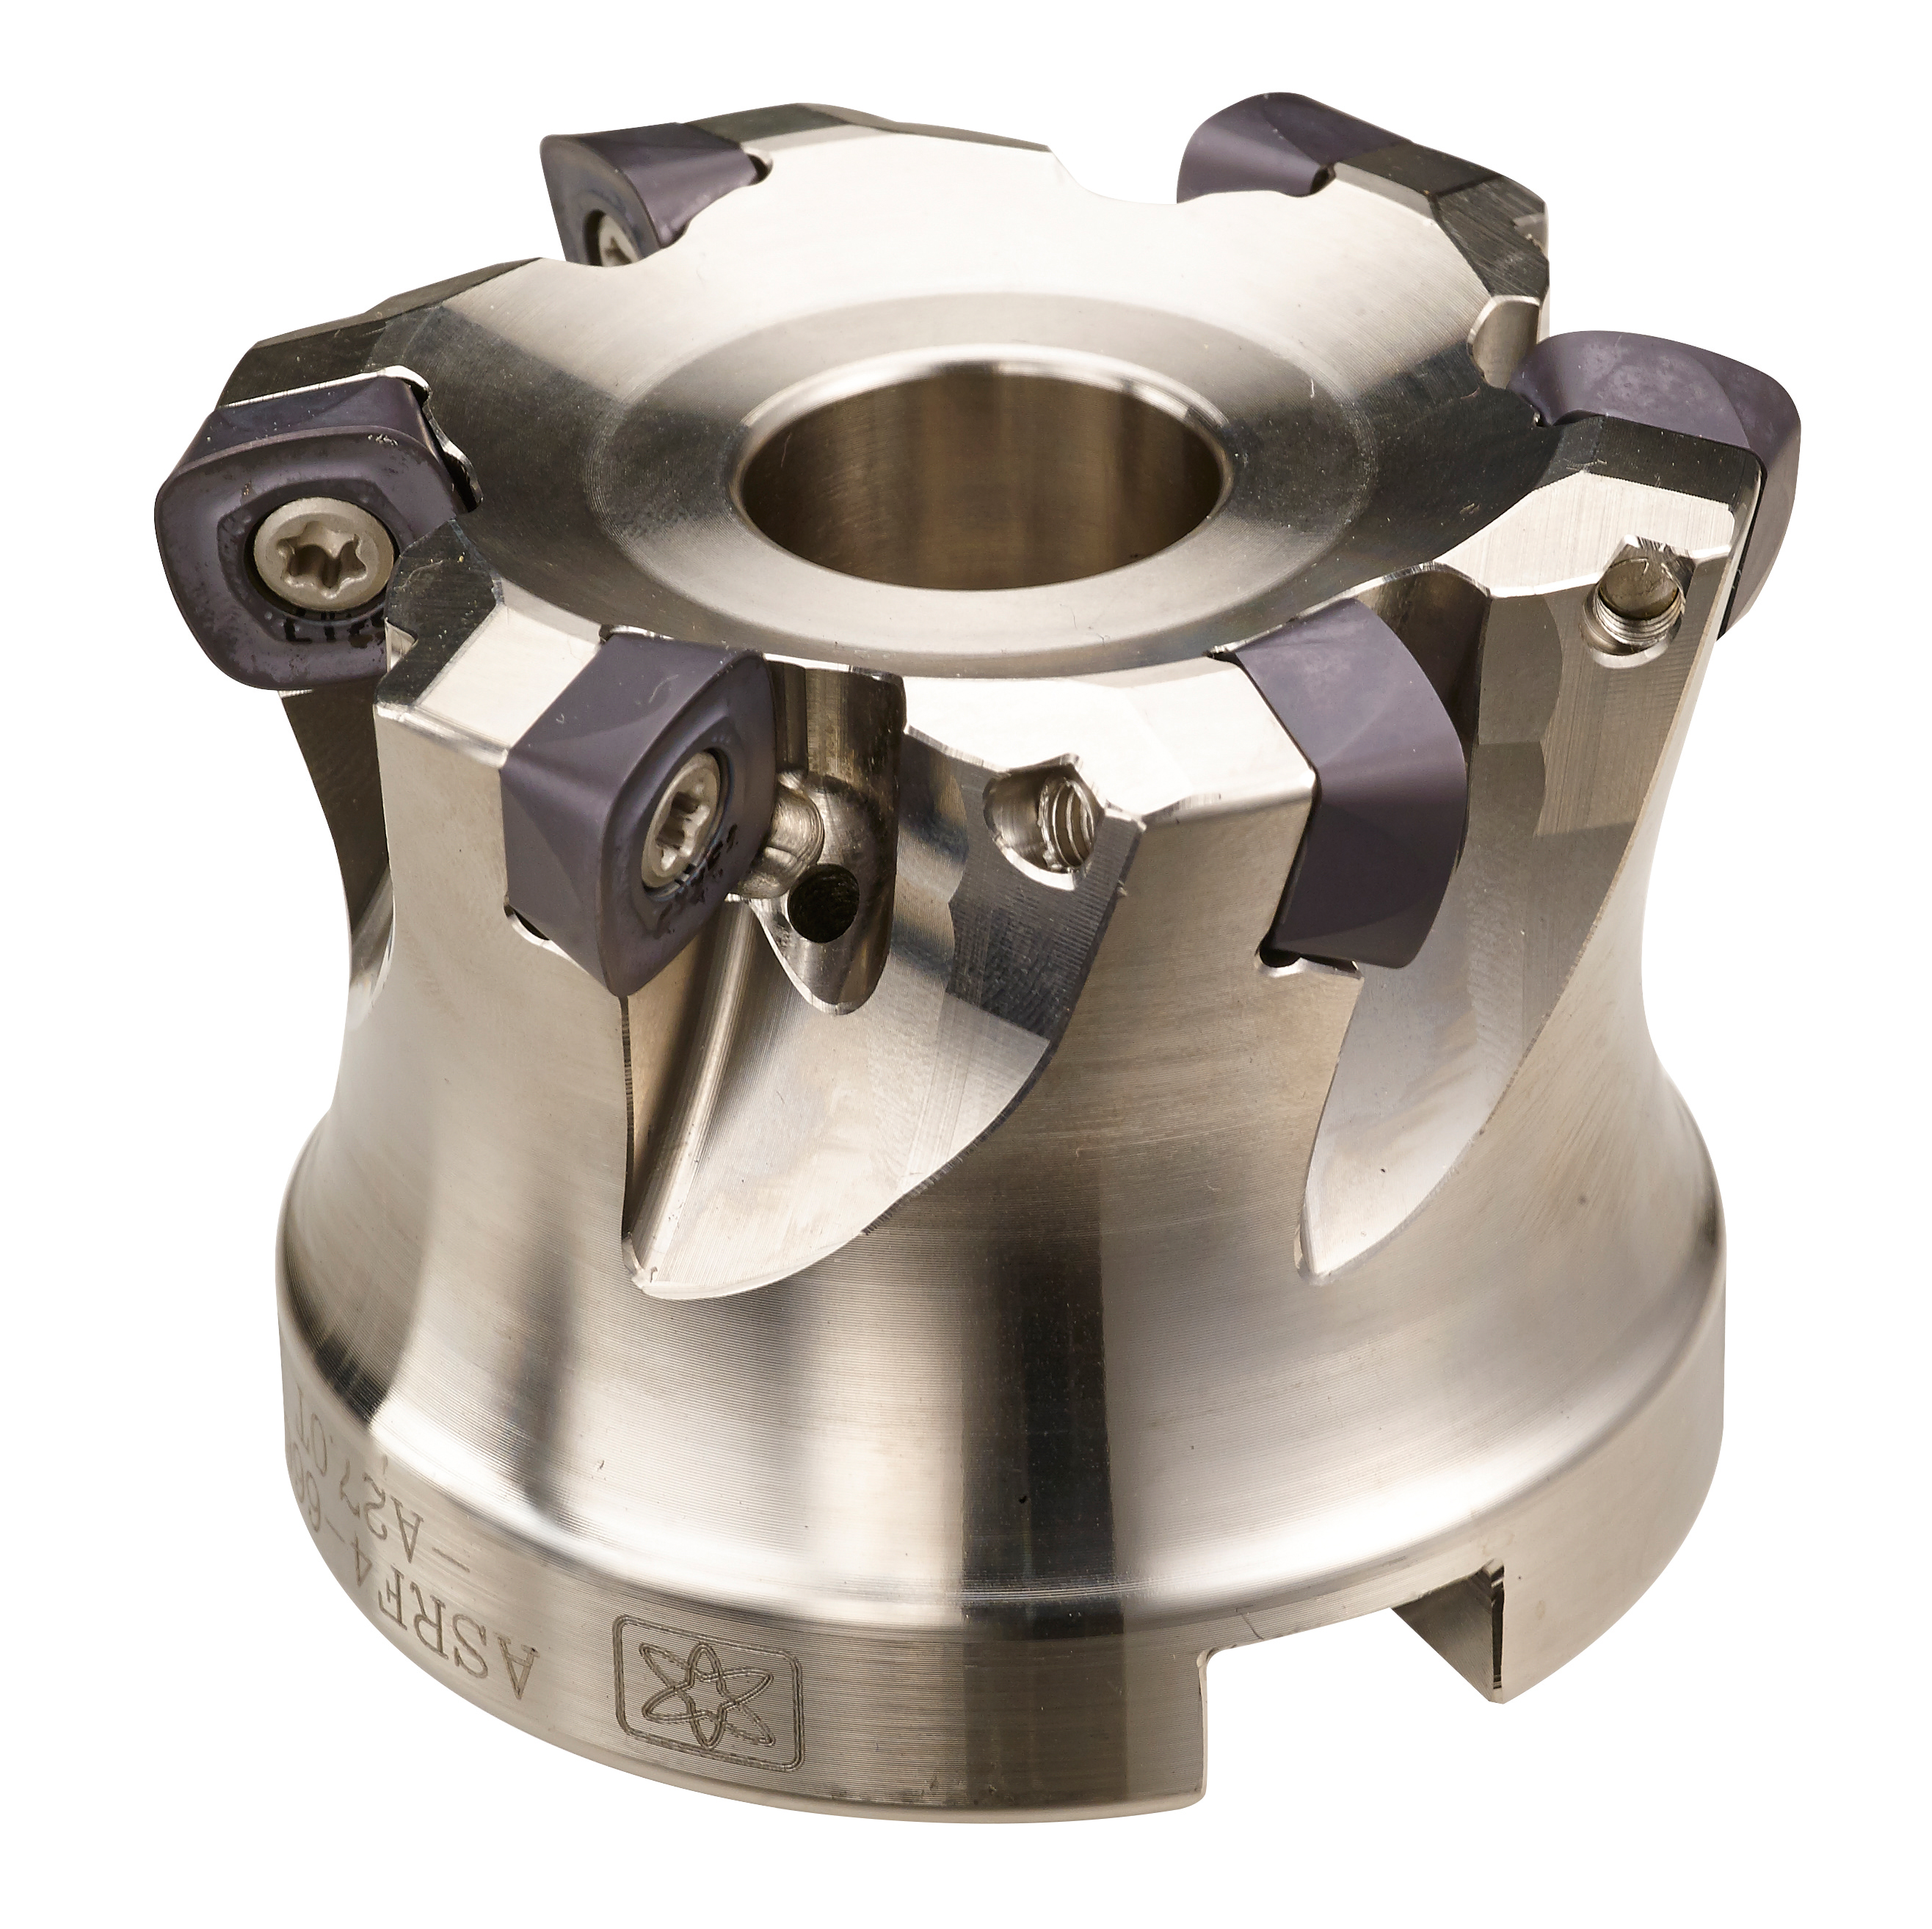 Products|ASRF4 （SD..1205ZDTN）High Feed Milling